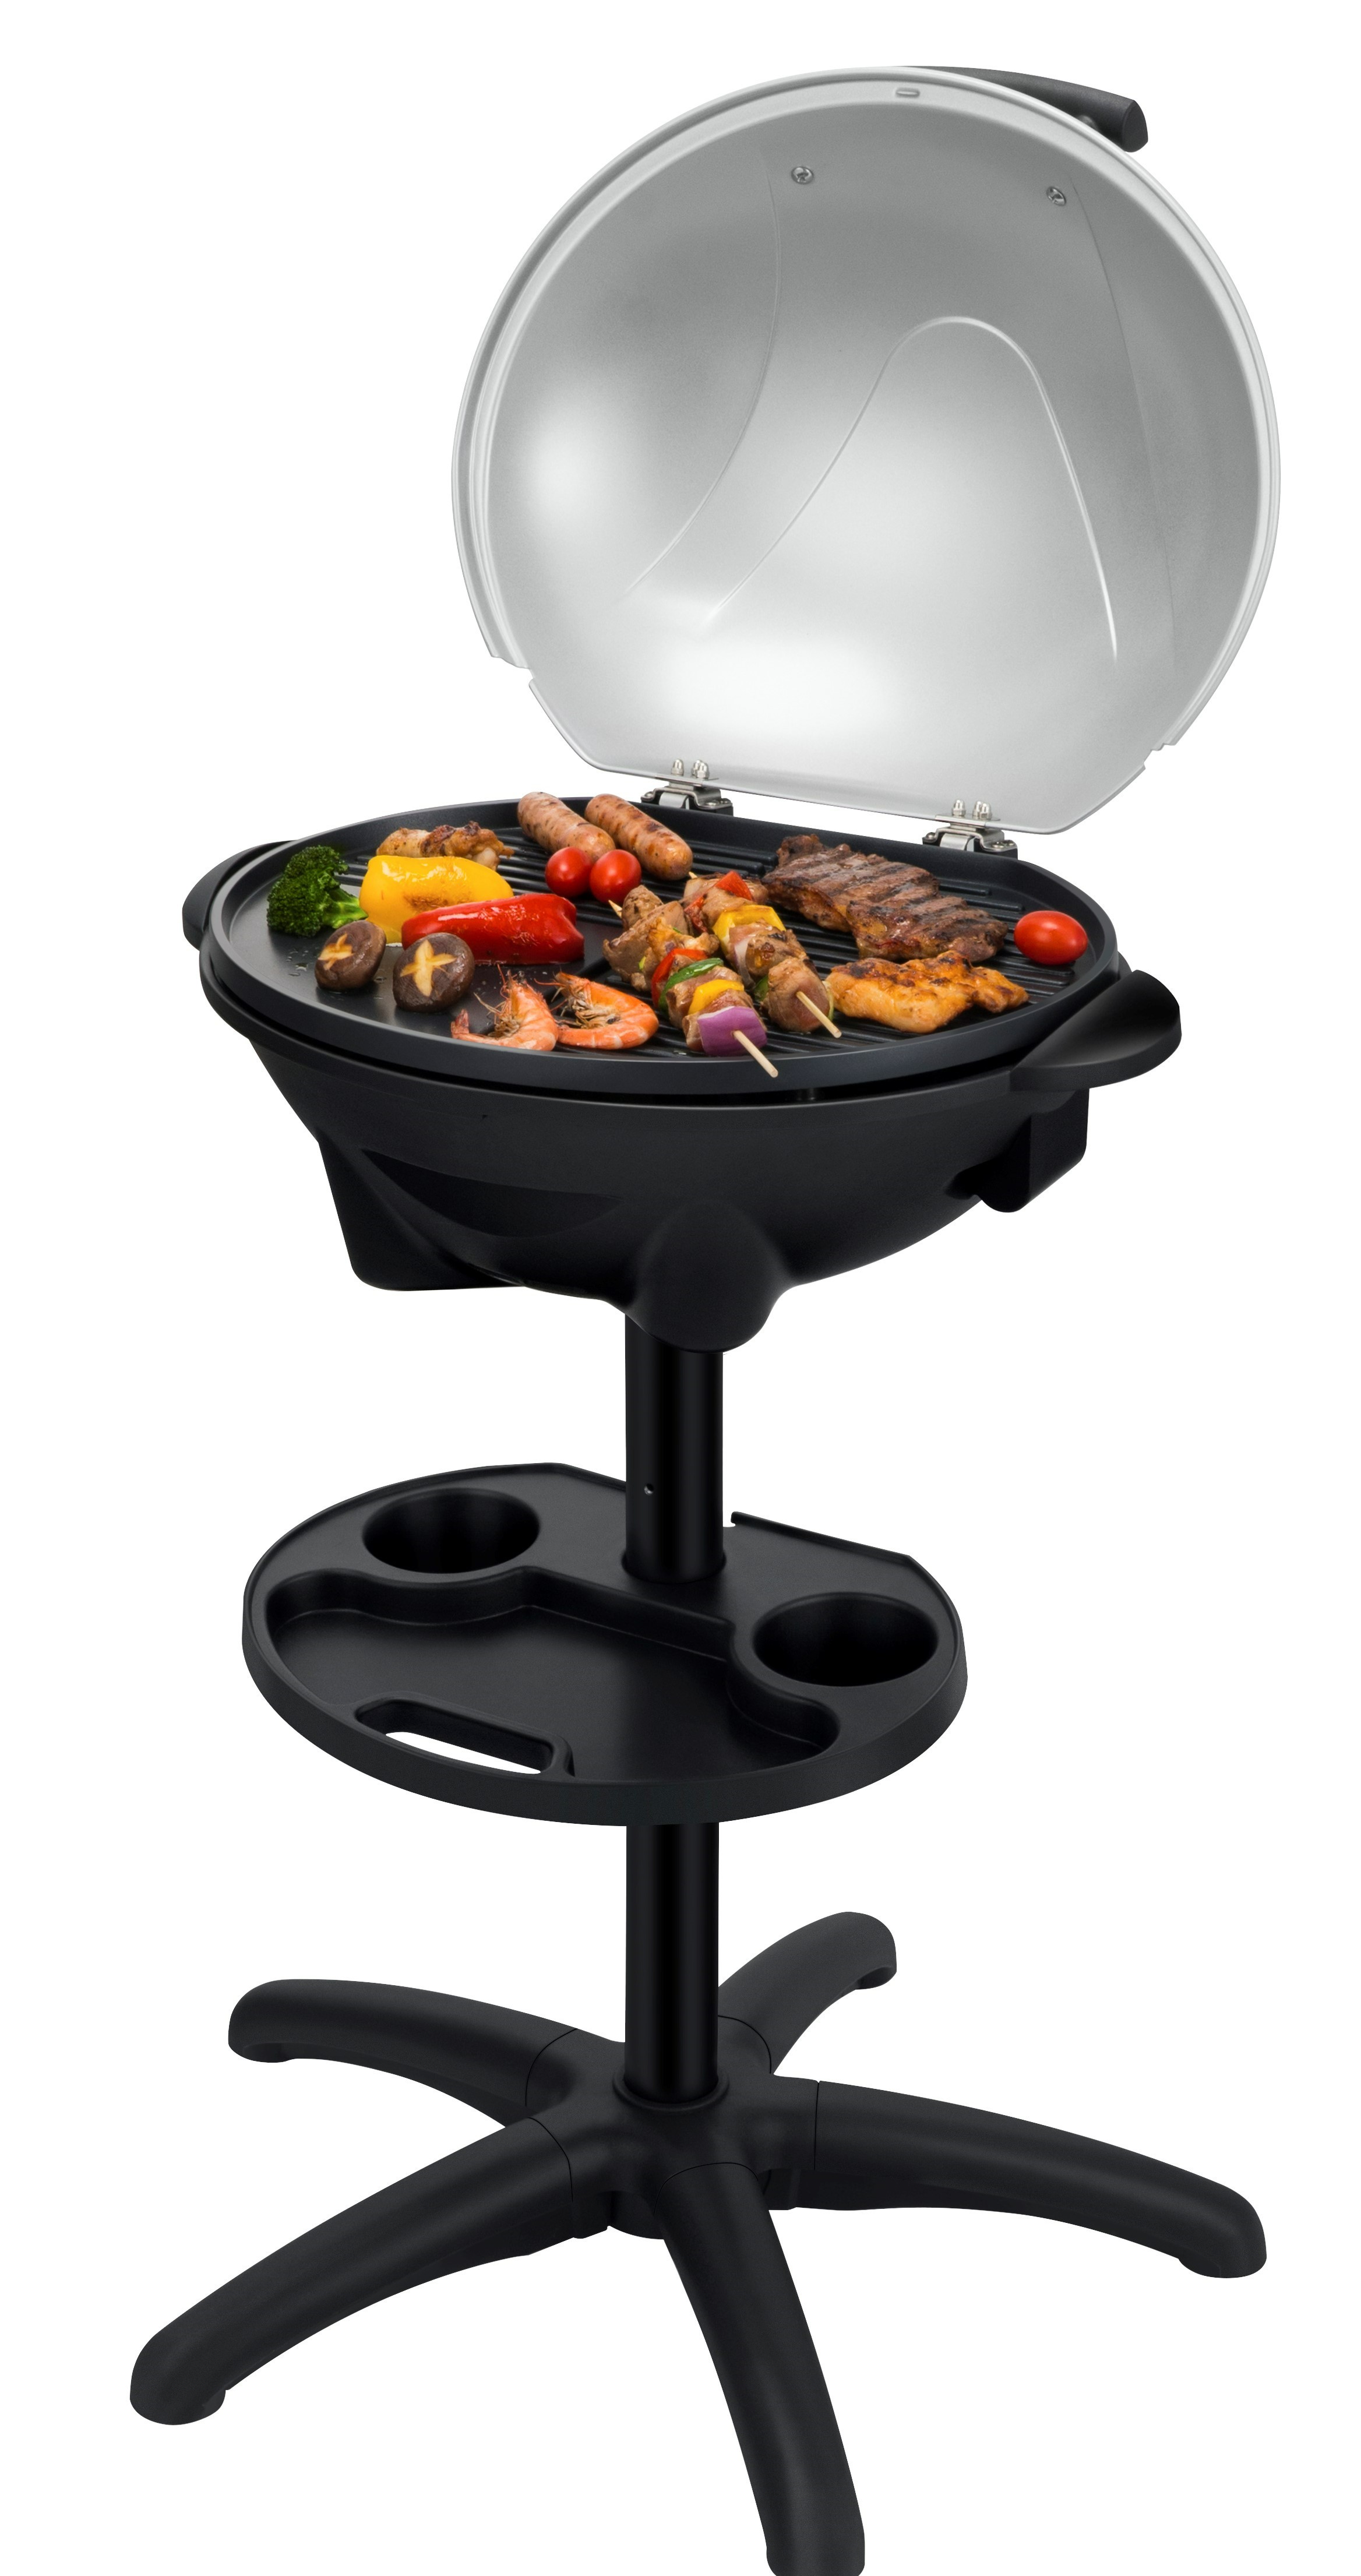 Cast Aluminium Plate Black 2400 W Adjustable Thermostat Grill Surface 44 x 33 cm SENYA SYCK-G045 Electric Standing Grill 2-in-1 Table Grill with Removable Lid 